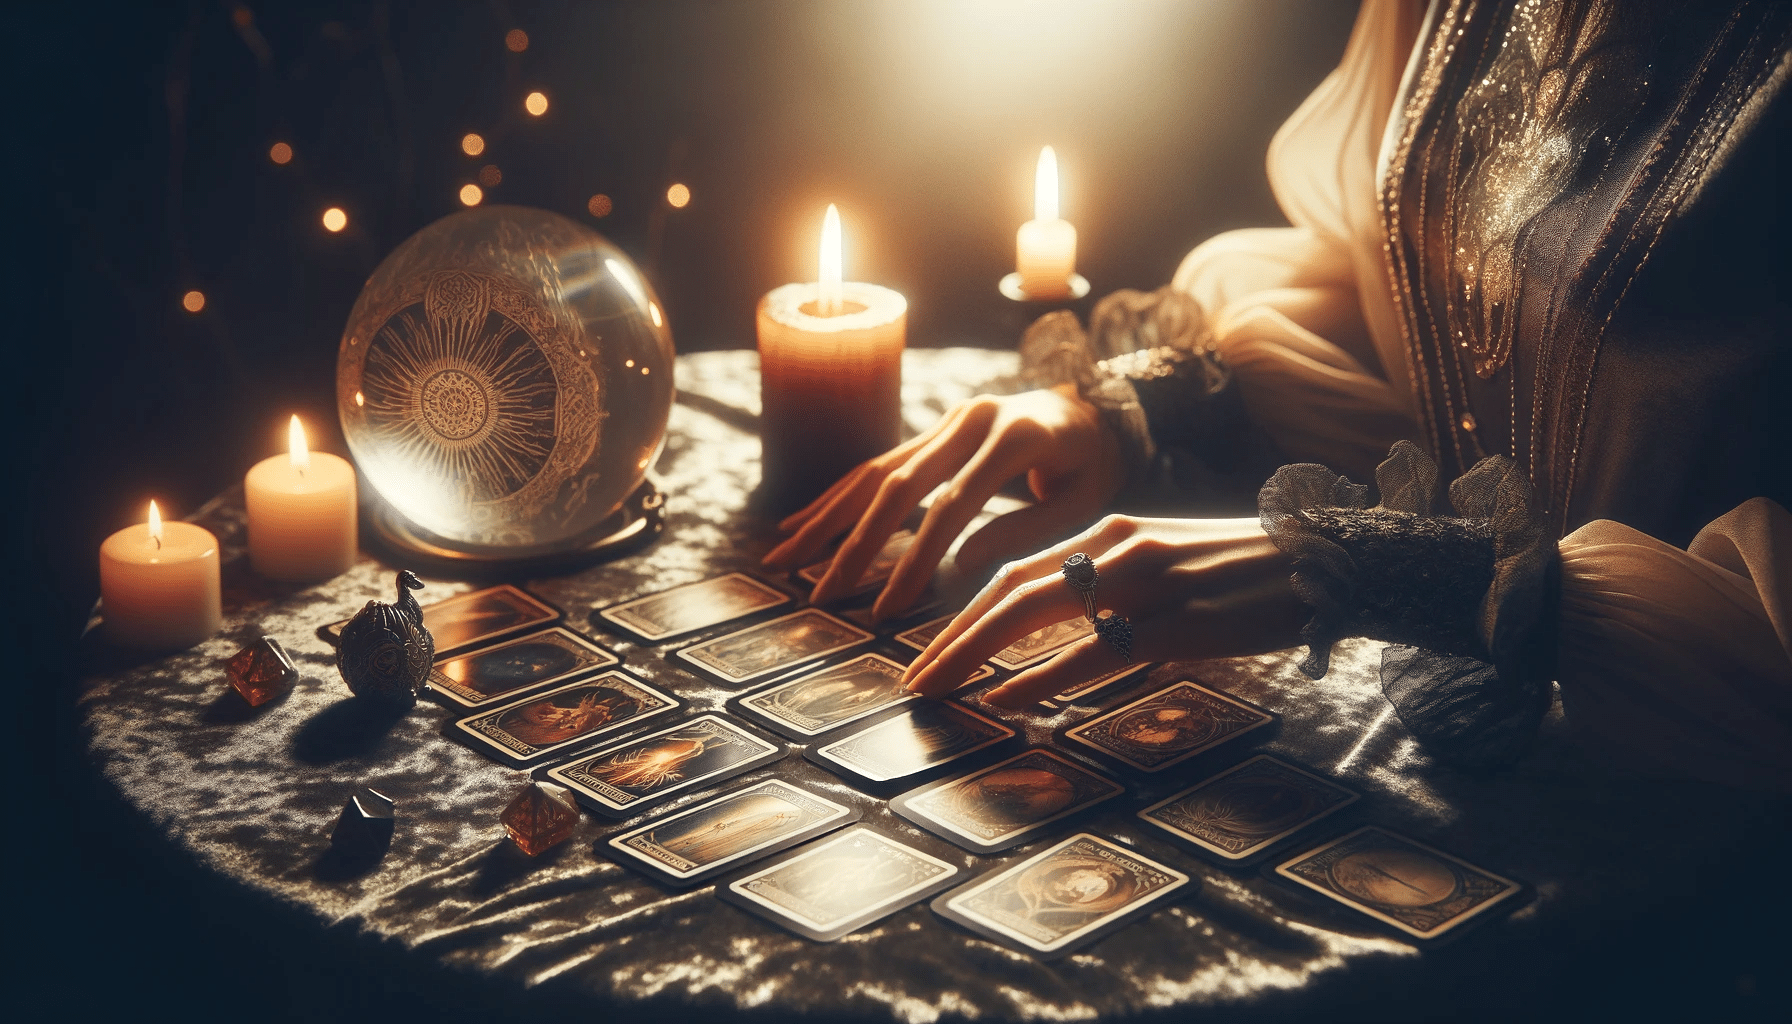 Hands arrange tarot cards on a velvet cloth for how to read tarot cards, with a candle and crystal ball under soft light.